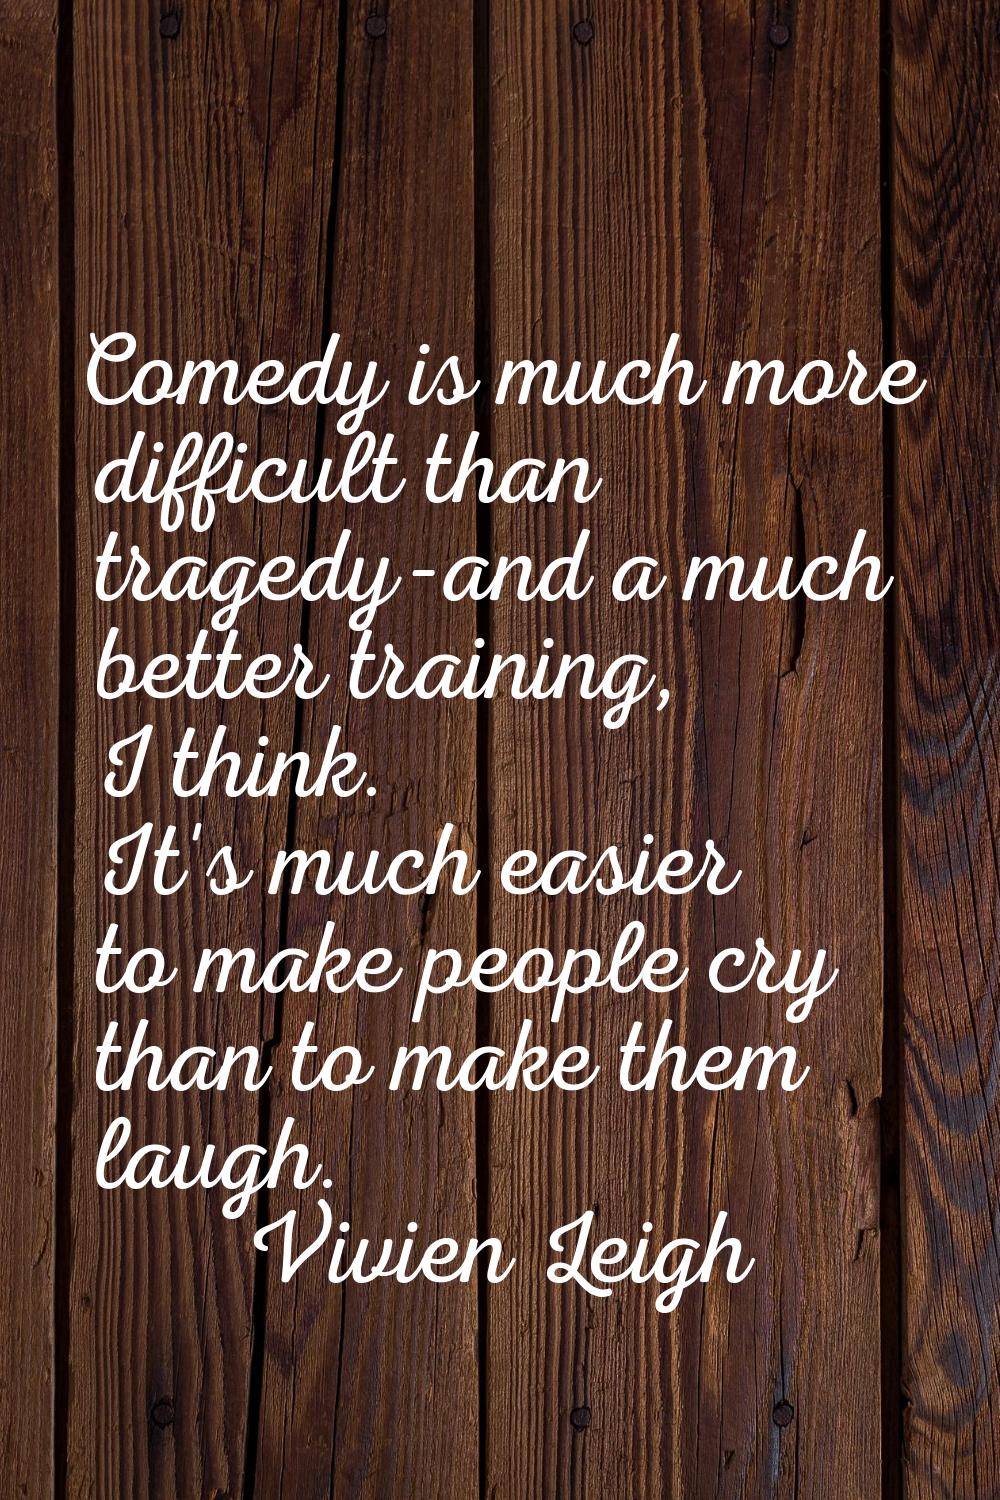 Comedy is much more difficult than tragedy-and a much better training, I think. It's much easier to